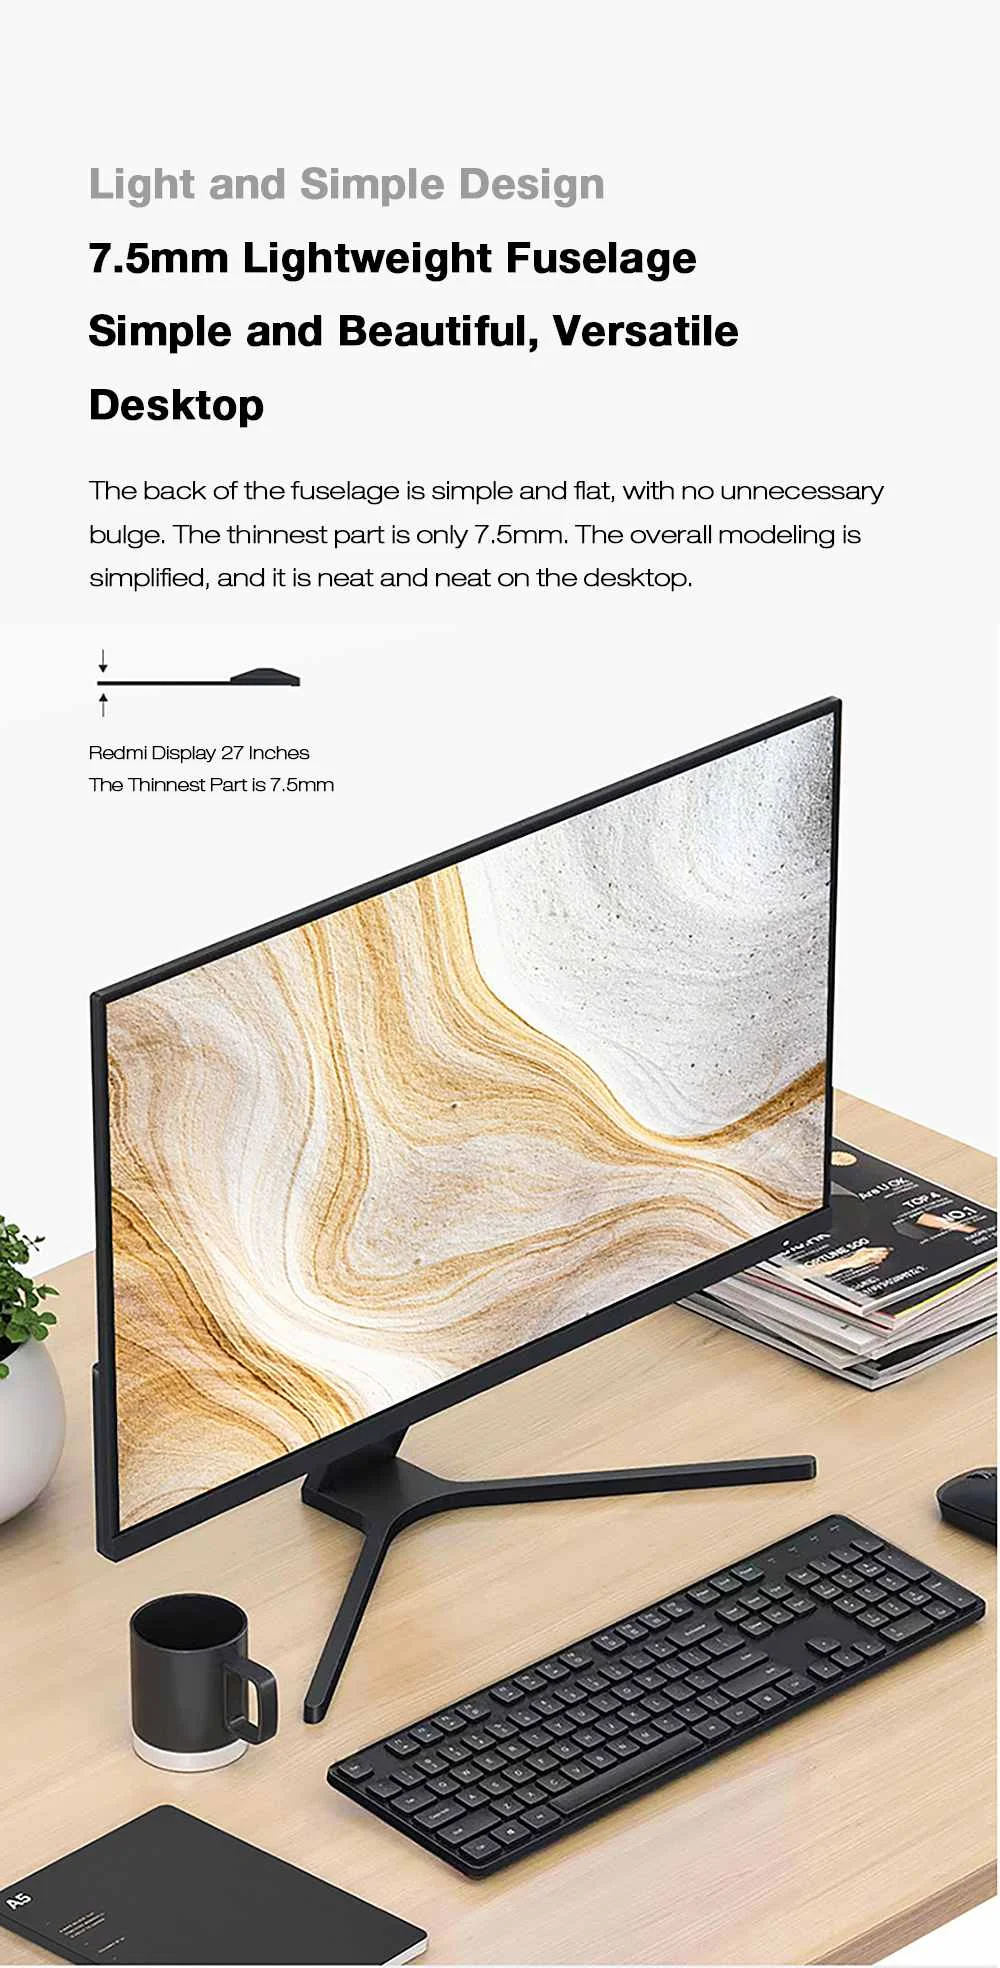 Redmi Display 27 inches 